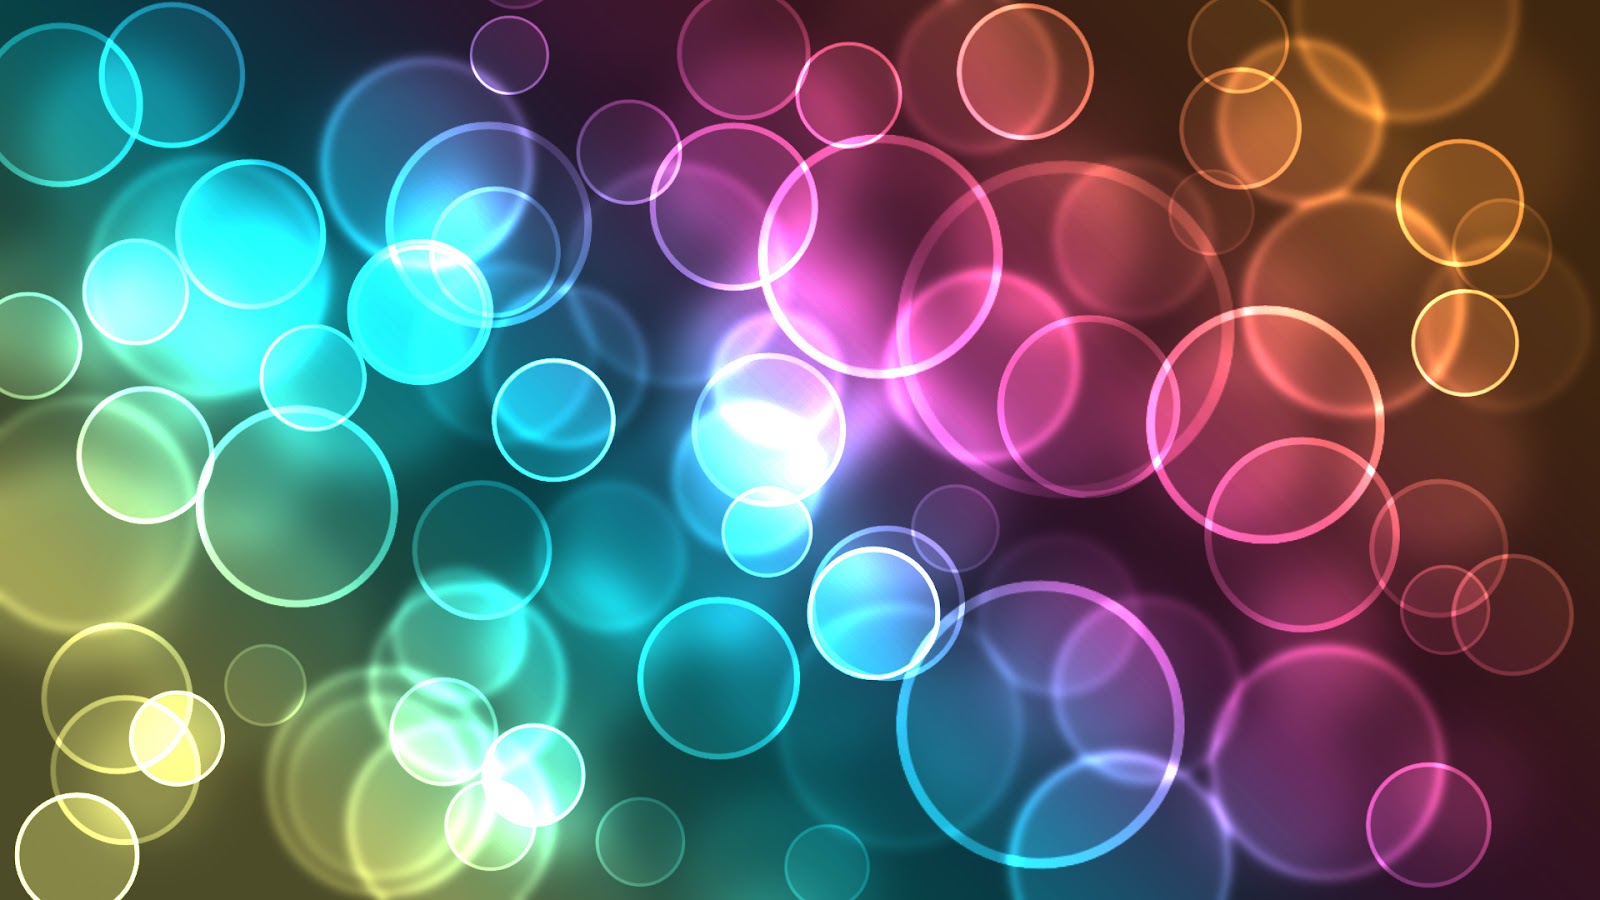 Colorful Bubbles Screensaver Abstract background